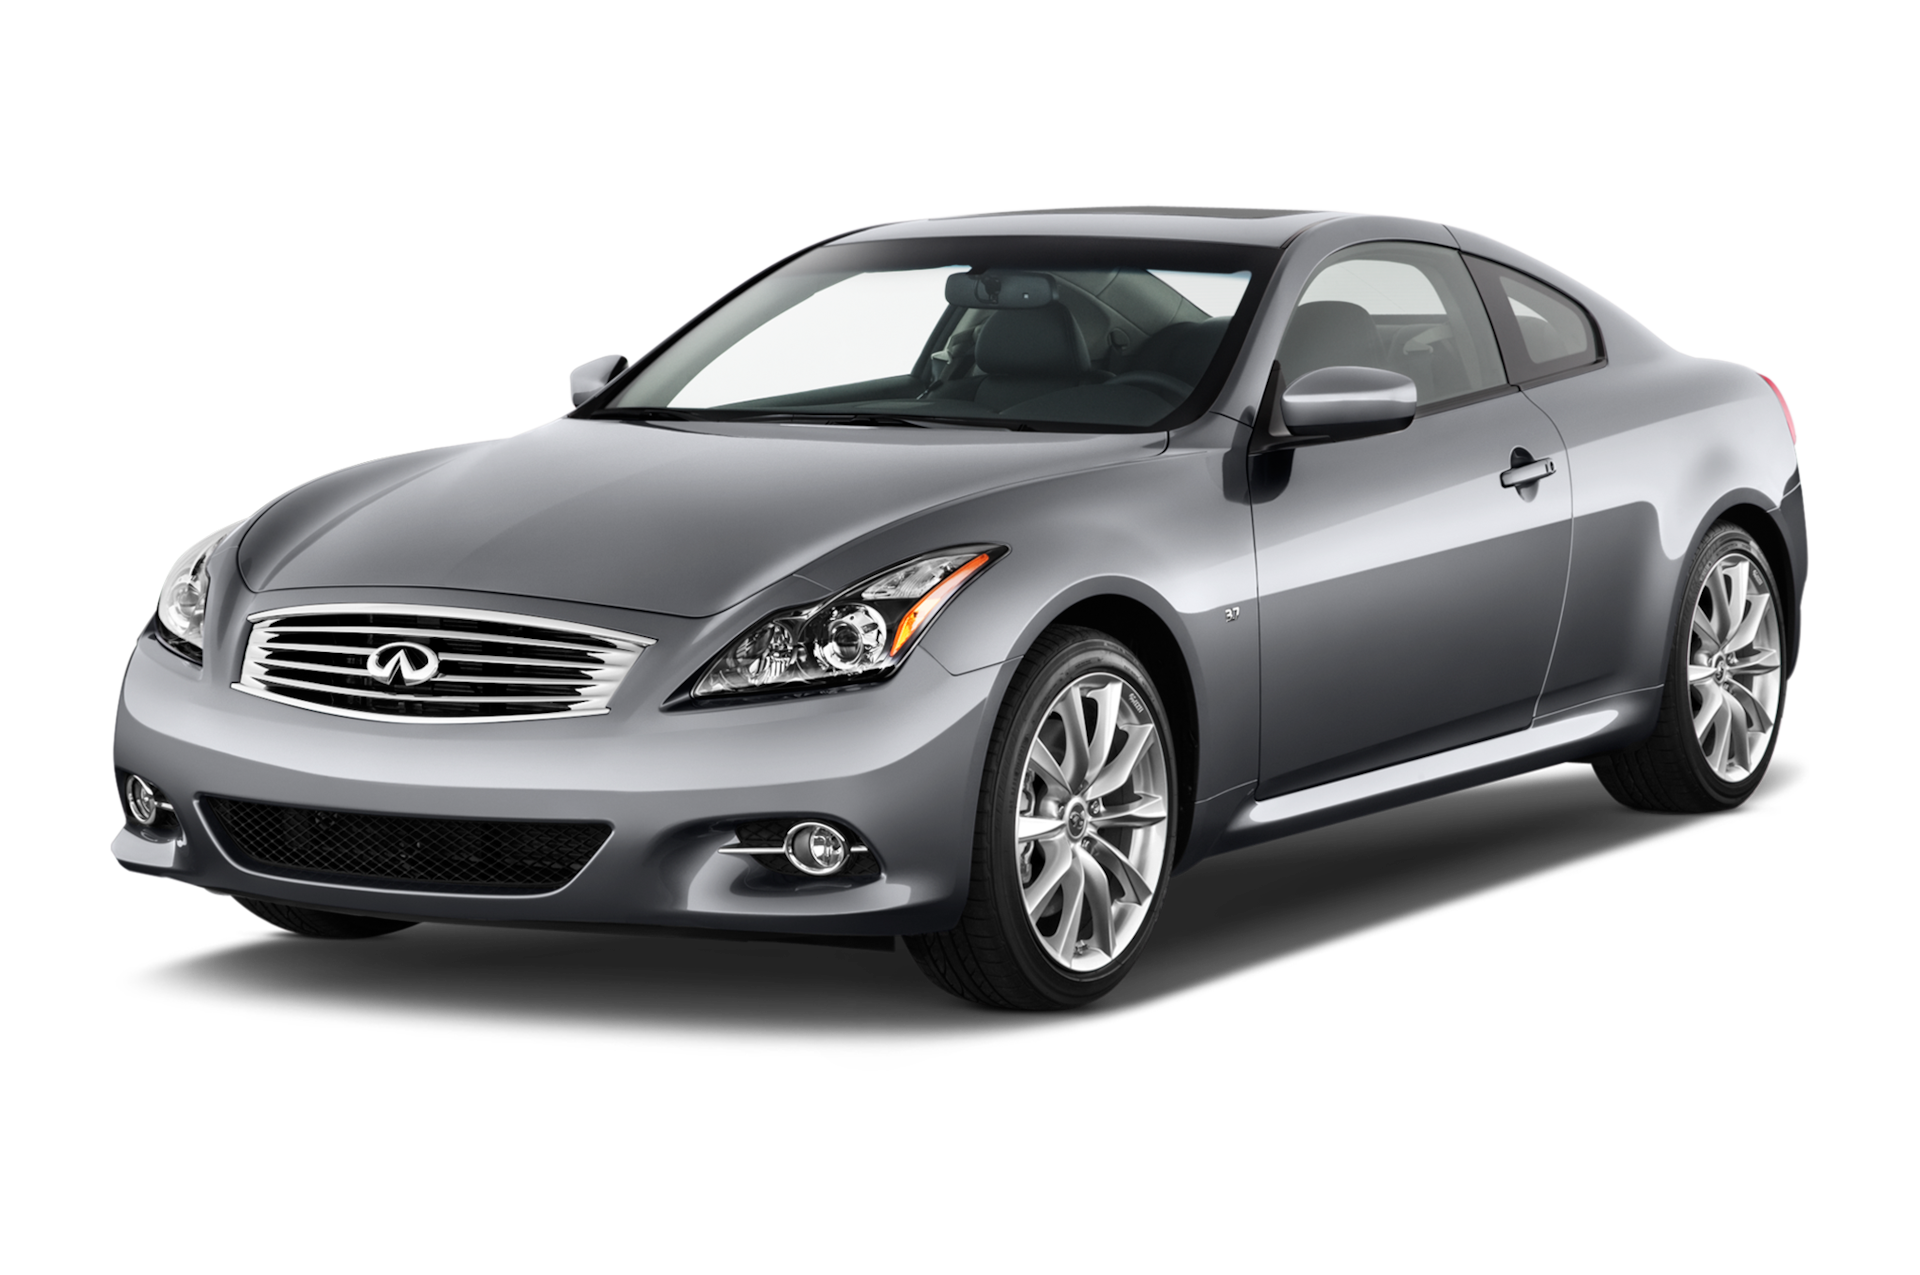 2015 Infiniti Q60 Prices, Reviews, and Photos - MotorTrend